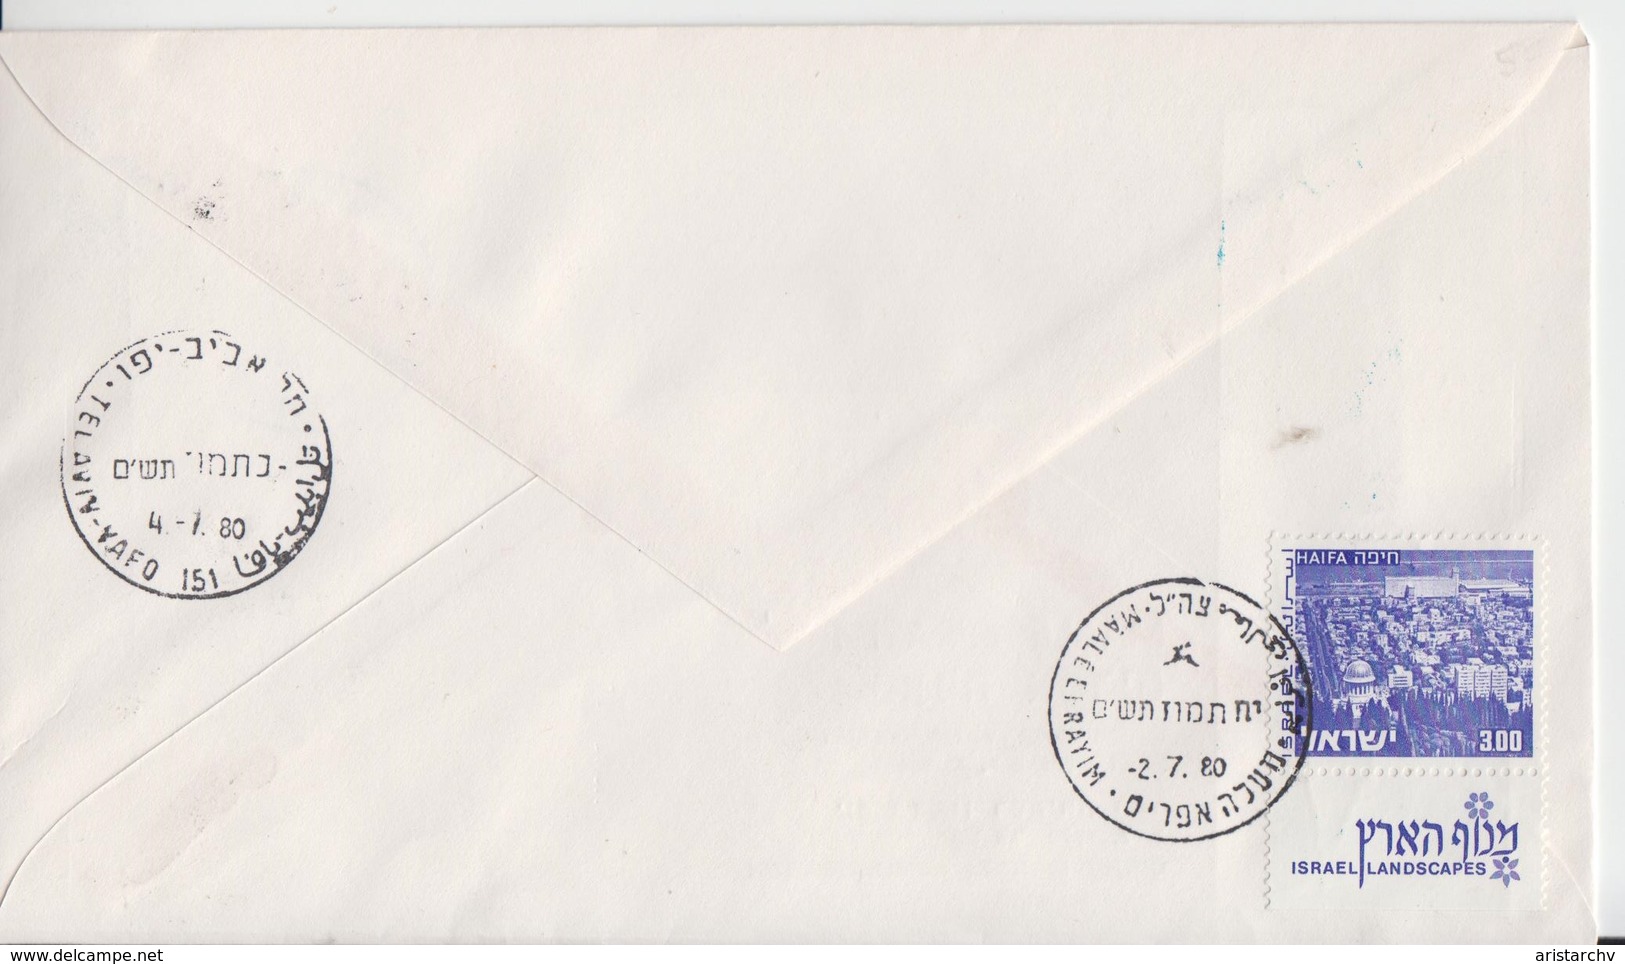 ISRAEL 1979 MAALE EFRAYIM OPENING DAY POST OFFICE UNDER MILITARY ADMINISTRATION TZAHAL IDF REGISTERED COVER - Portomarken